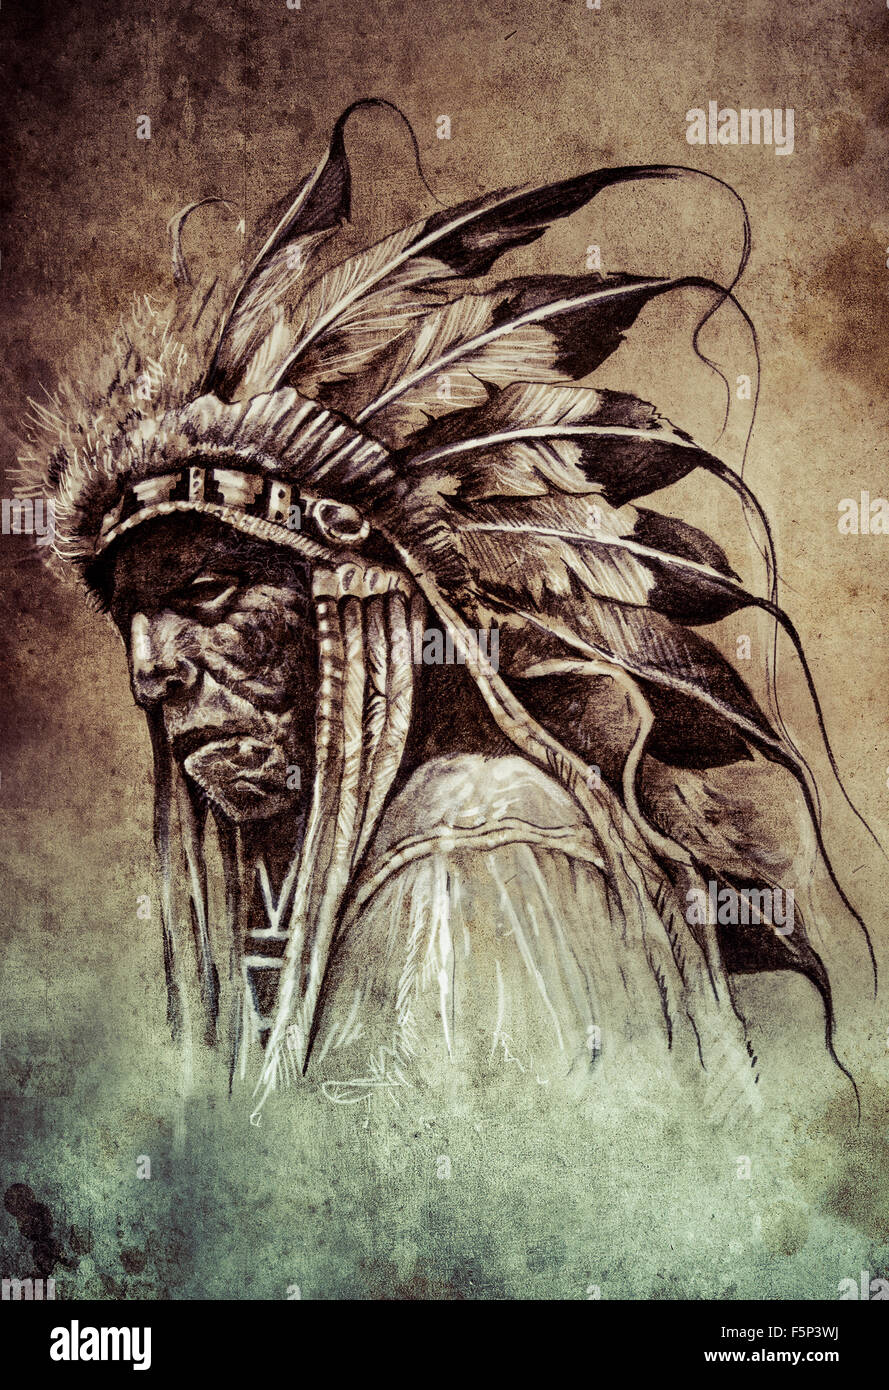 Sketch of tattoo art, American Indian Chief illustration Stock Illustration  by ©outsiderzone #9745536